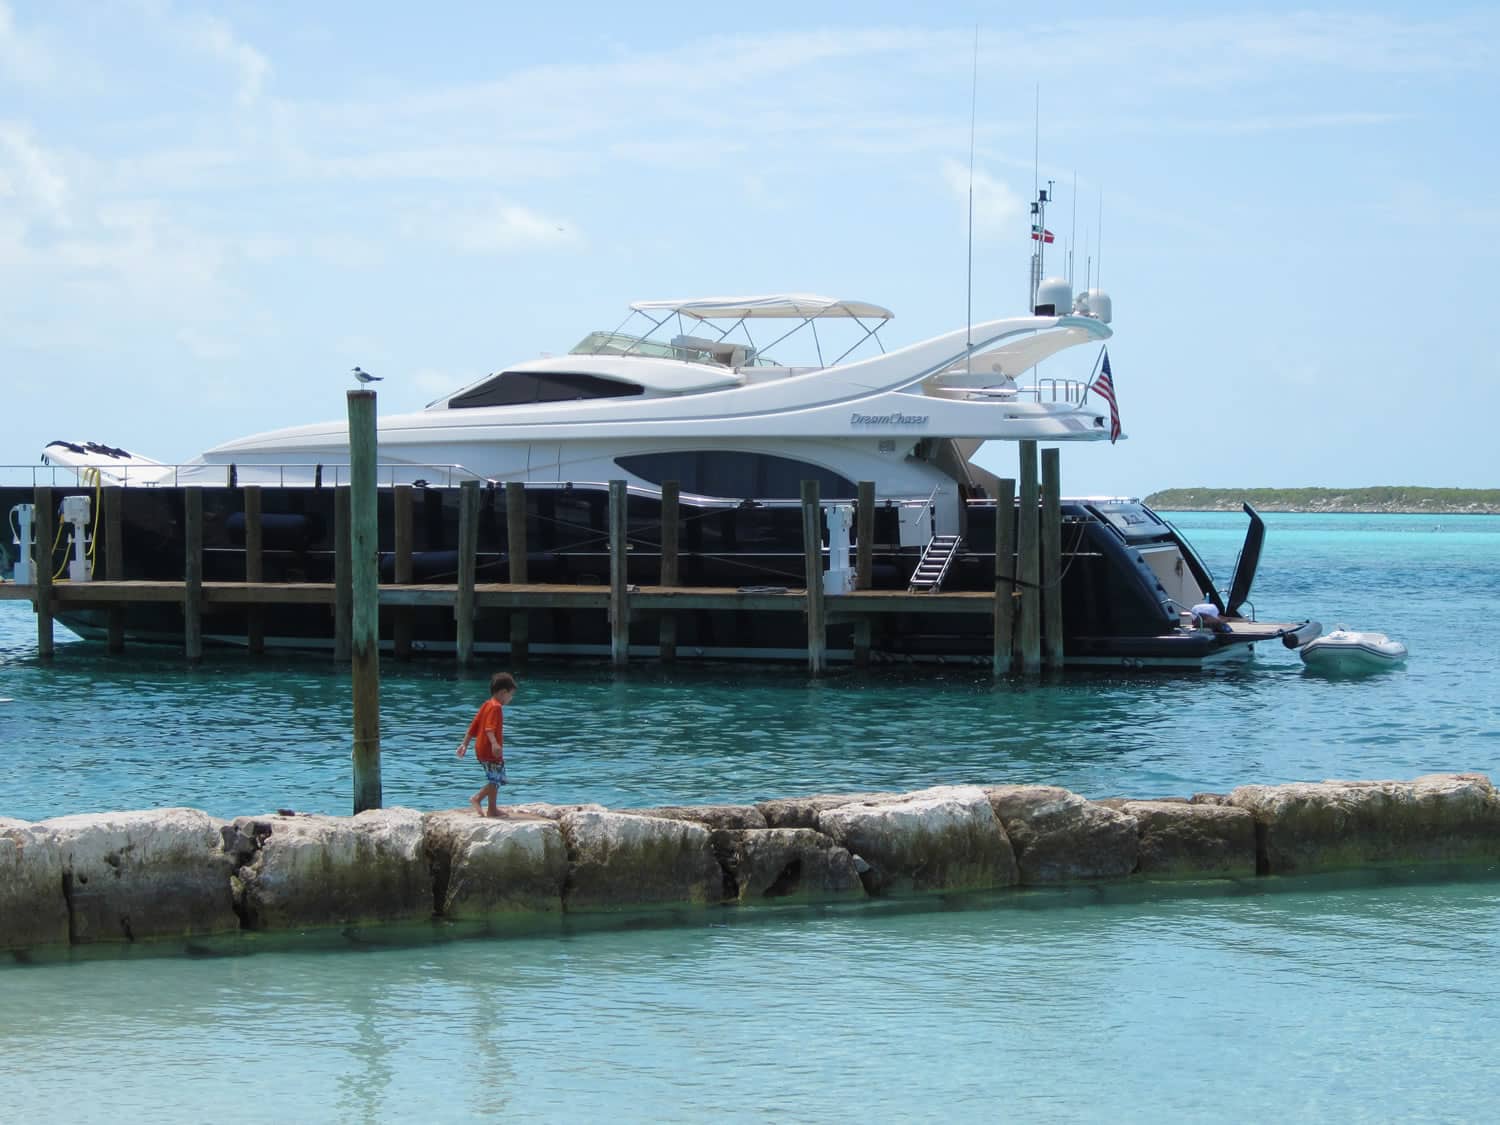 A boat docked in the turquoise waters of Staniel Cay in The Bahamas.